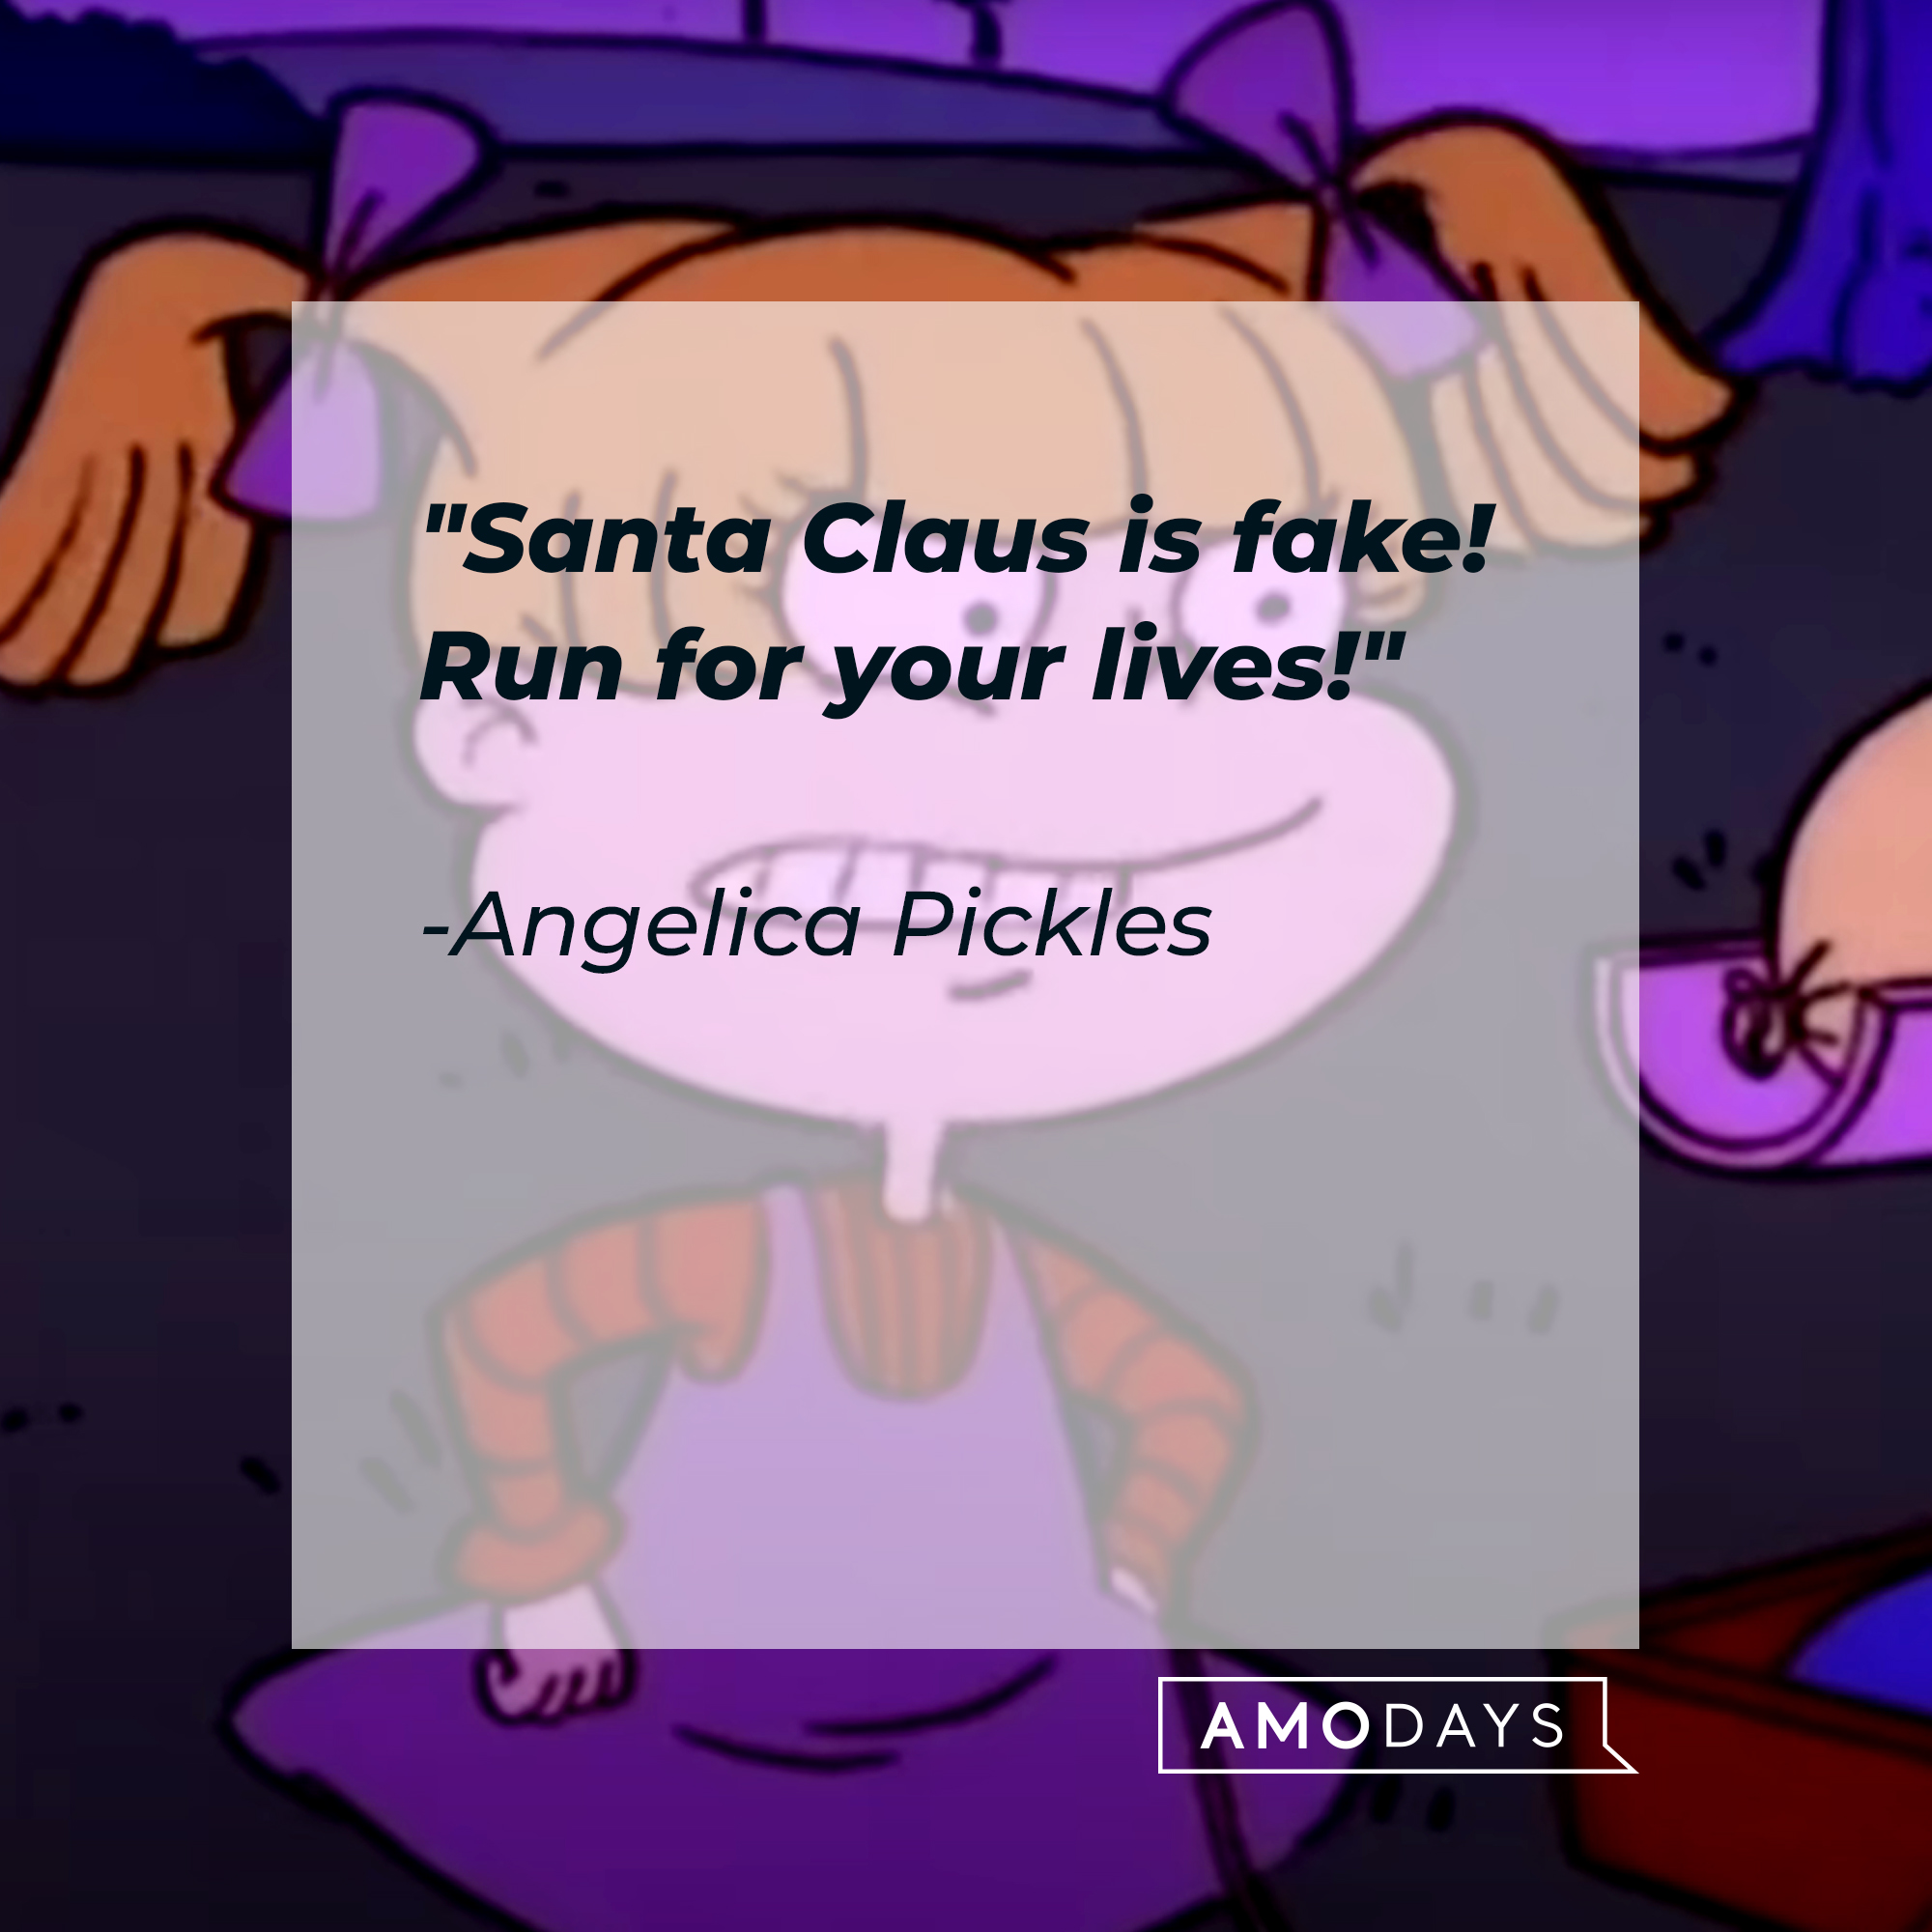 Angelica Pickles’ quote: "Santa Claus is fake! Run for your lives!" | Source: Facebook/Rugrats